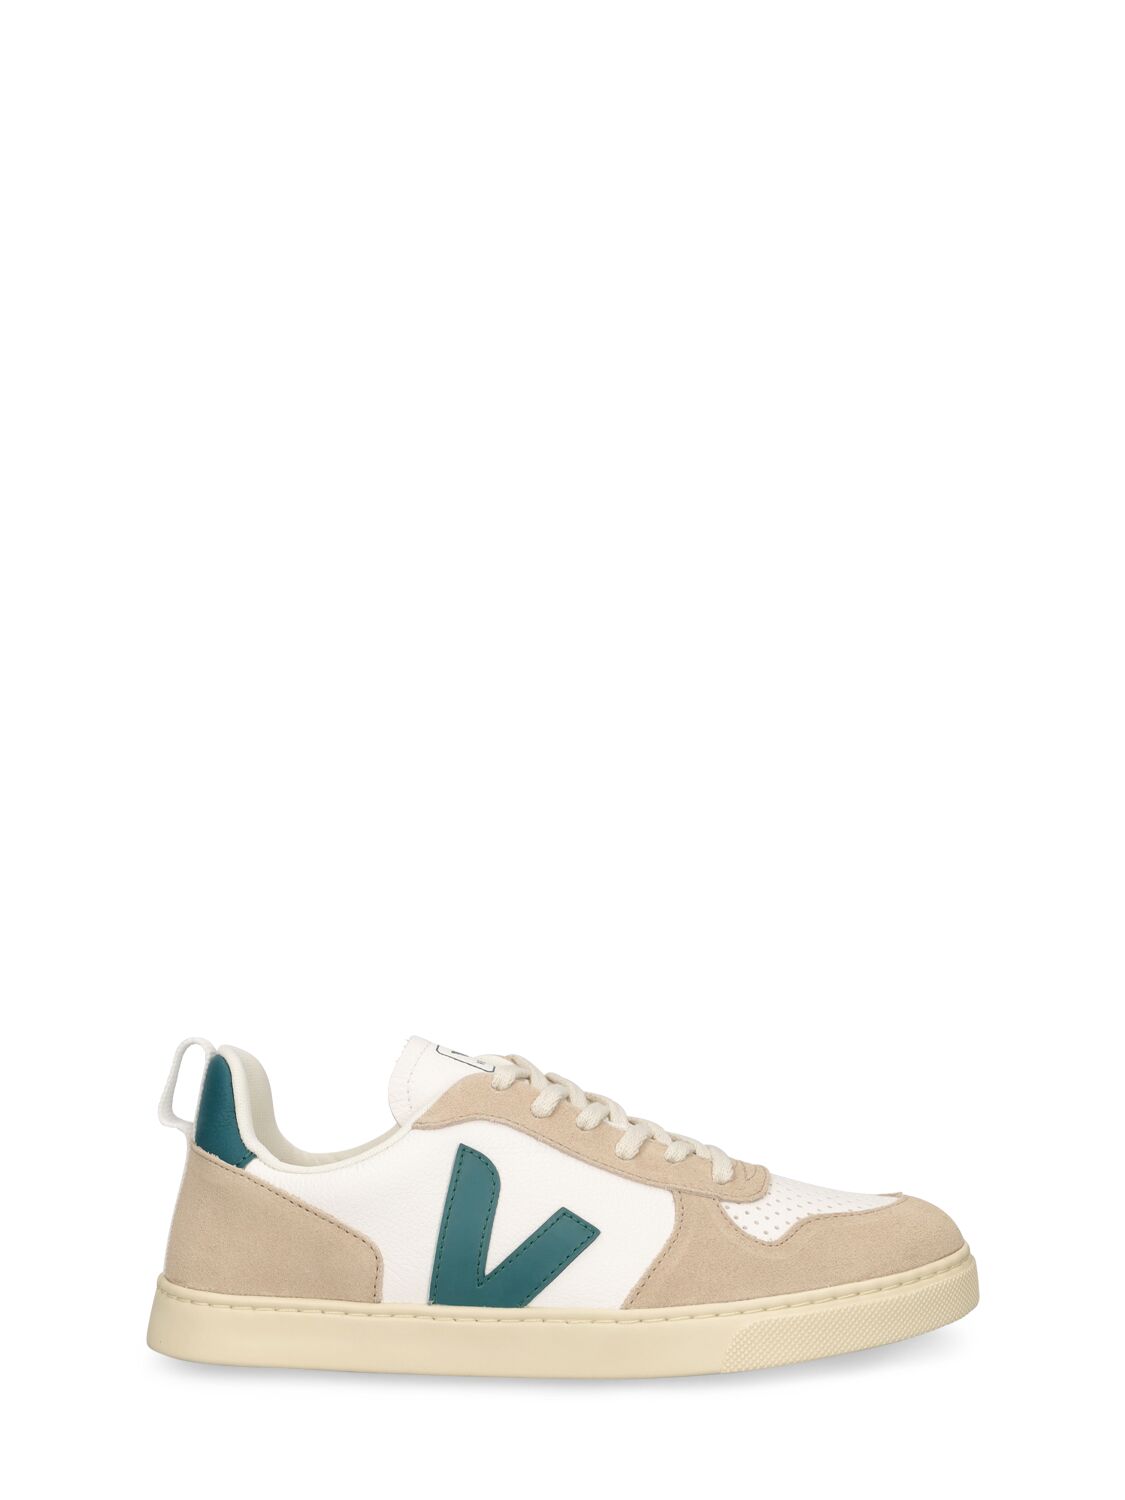 V-10 Suede Strap Sneakers